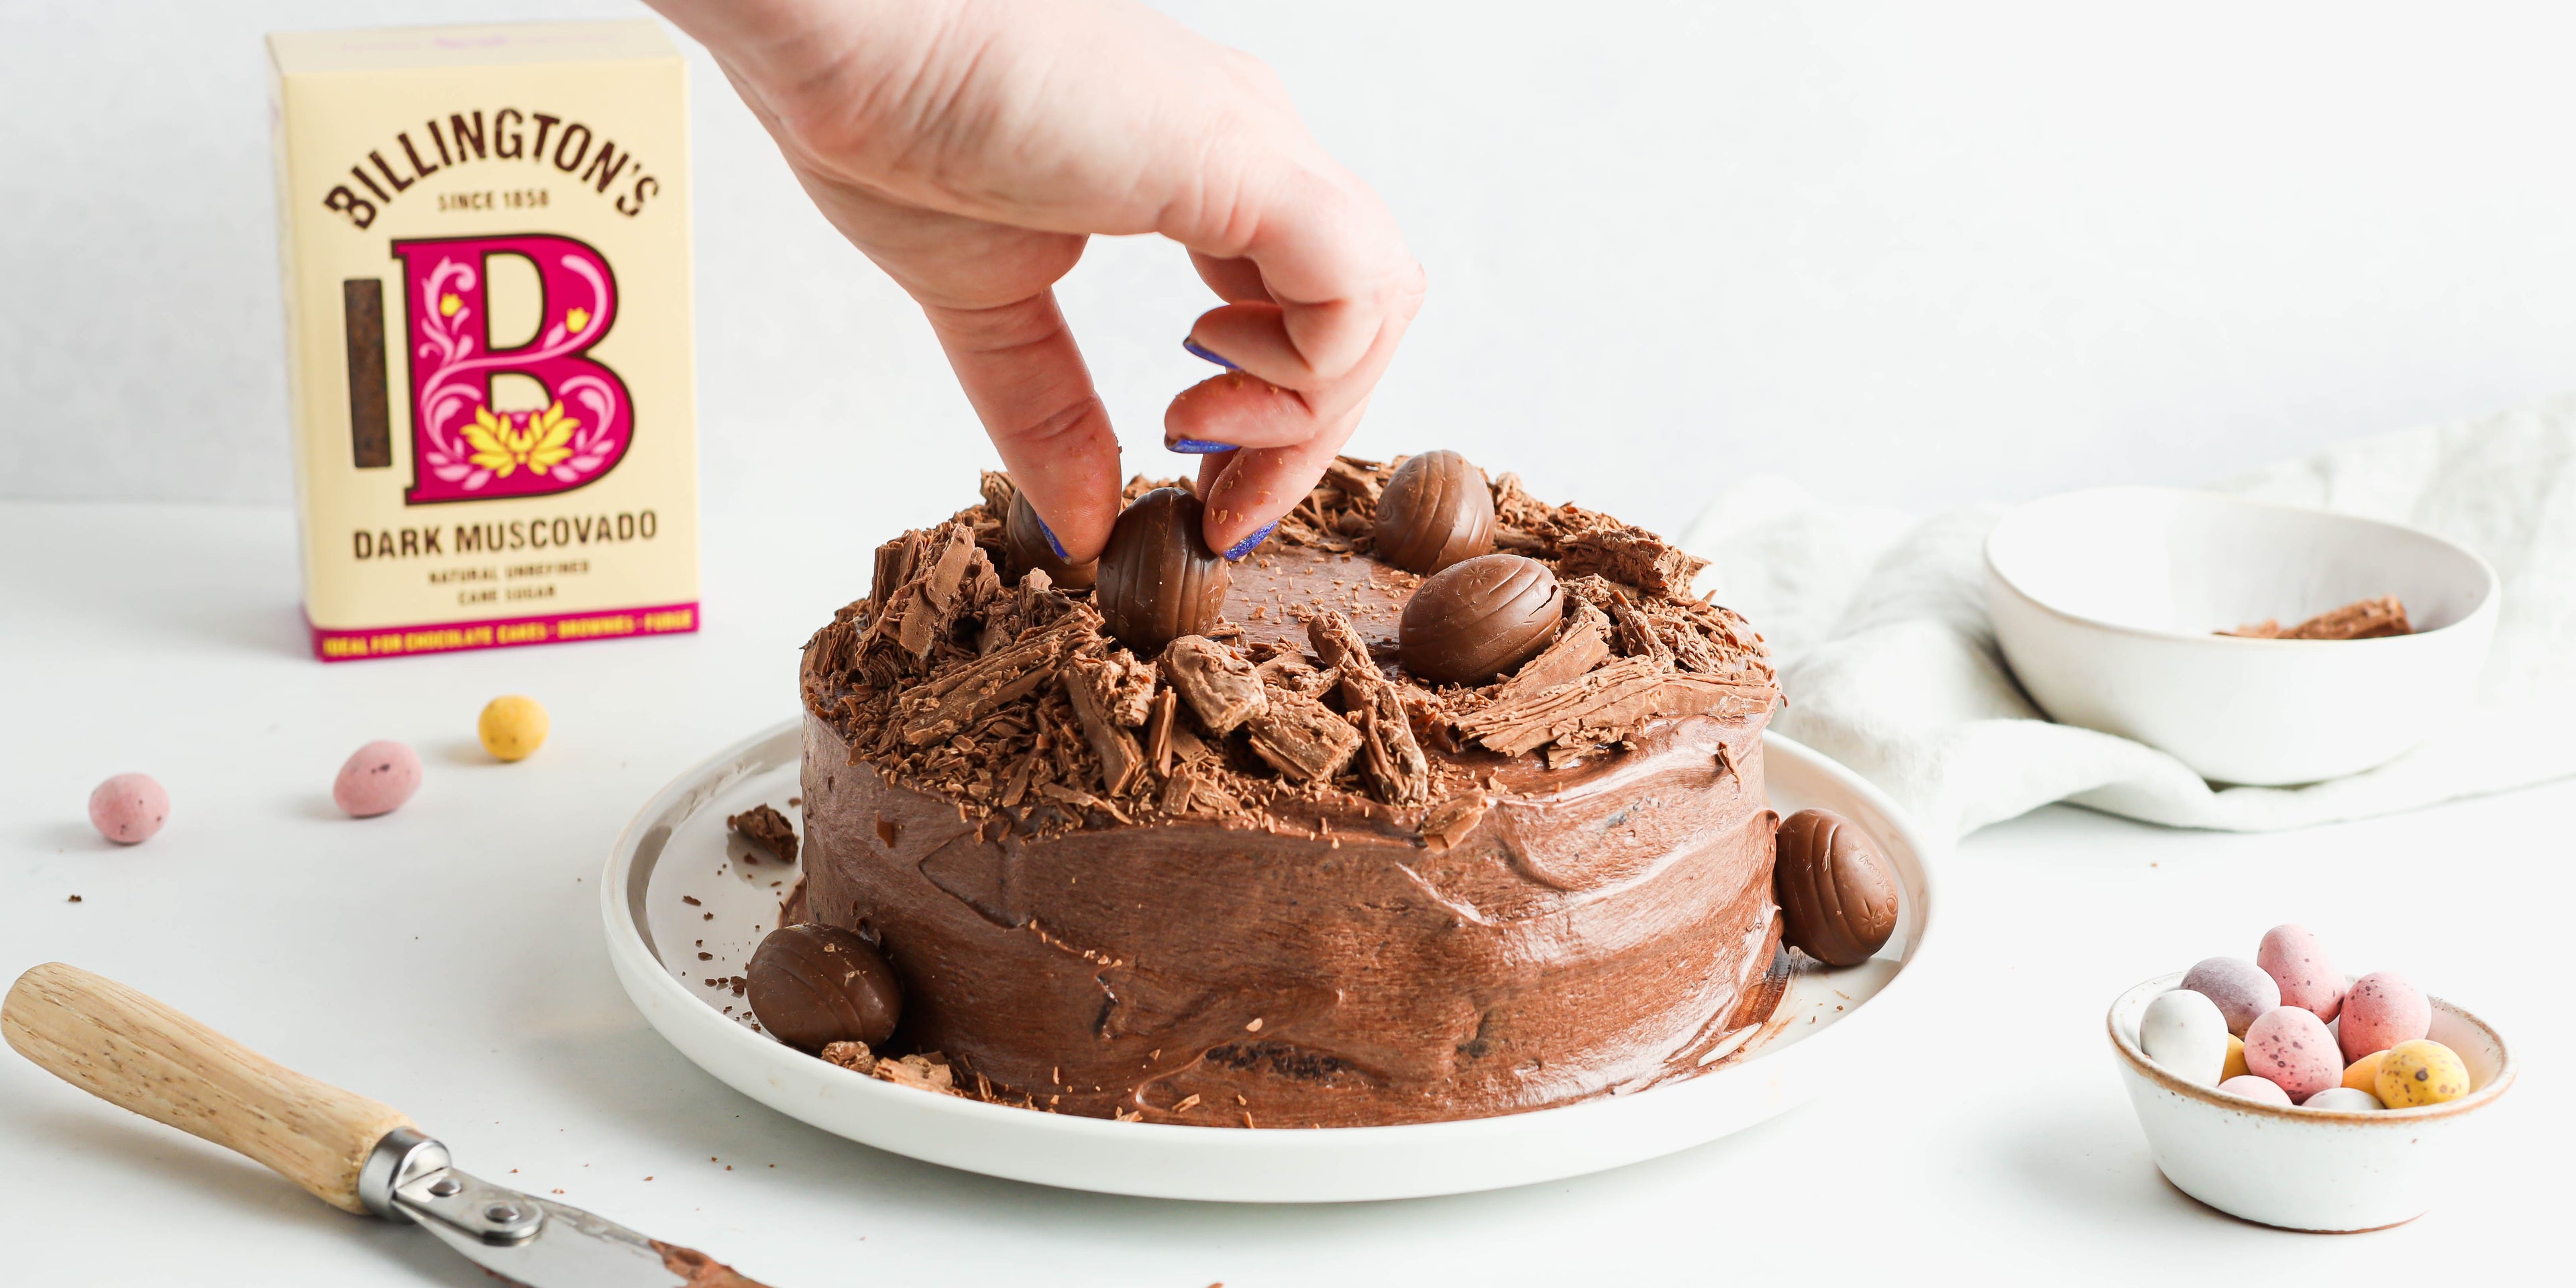 Chocolate Nest Cake with a hand reaching to decorate the top with chocolate eggs, with a box of Billington's Dark Muscovado Sugar in the background